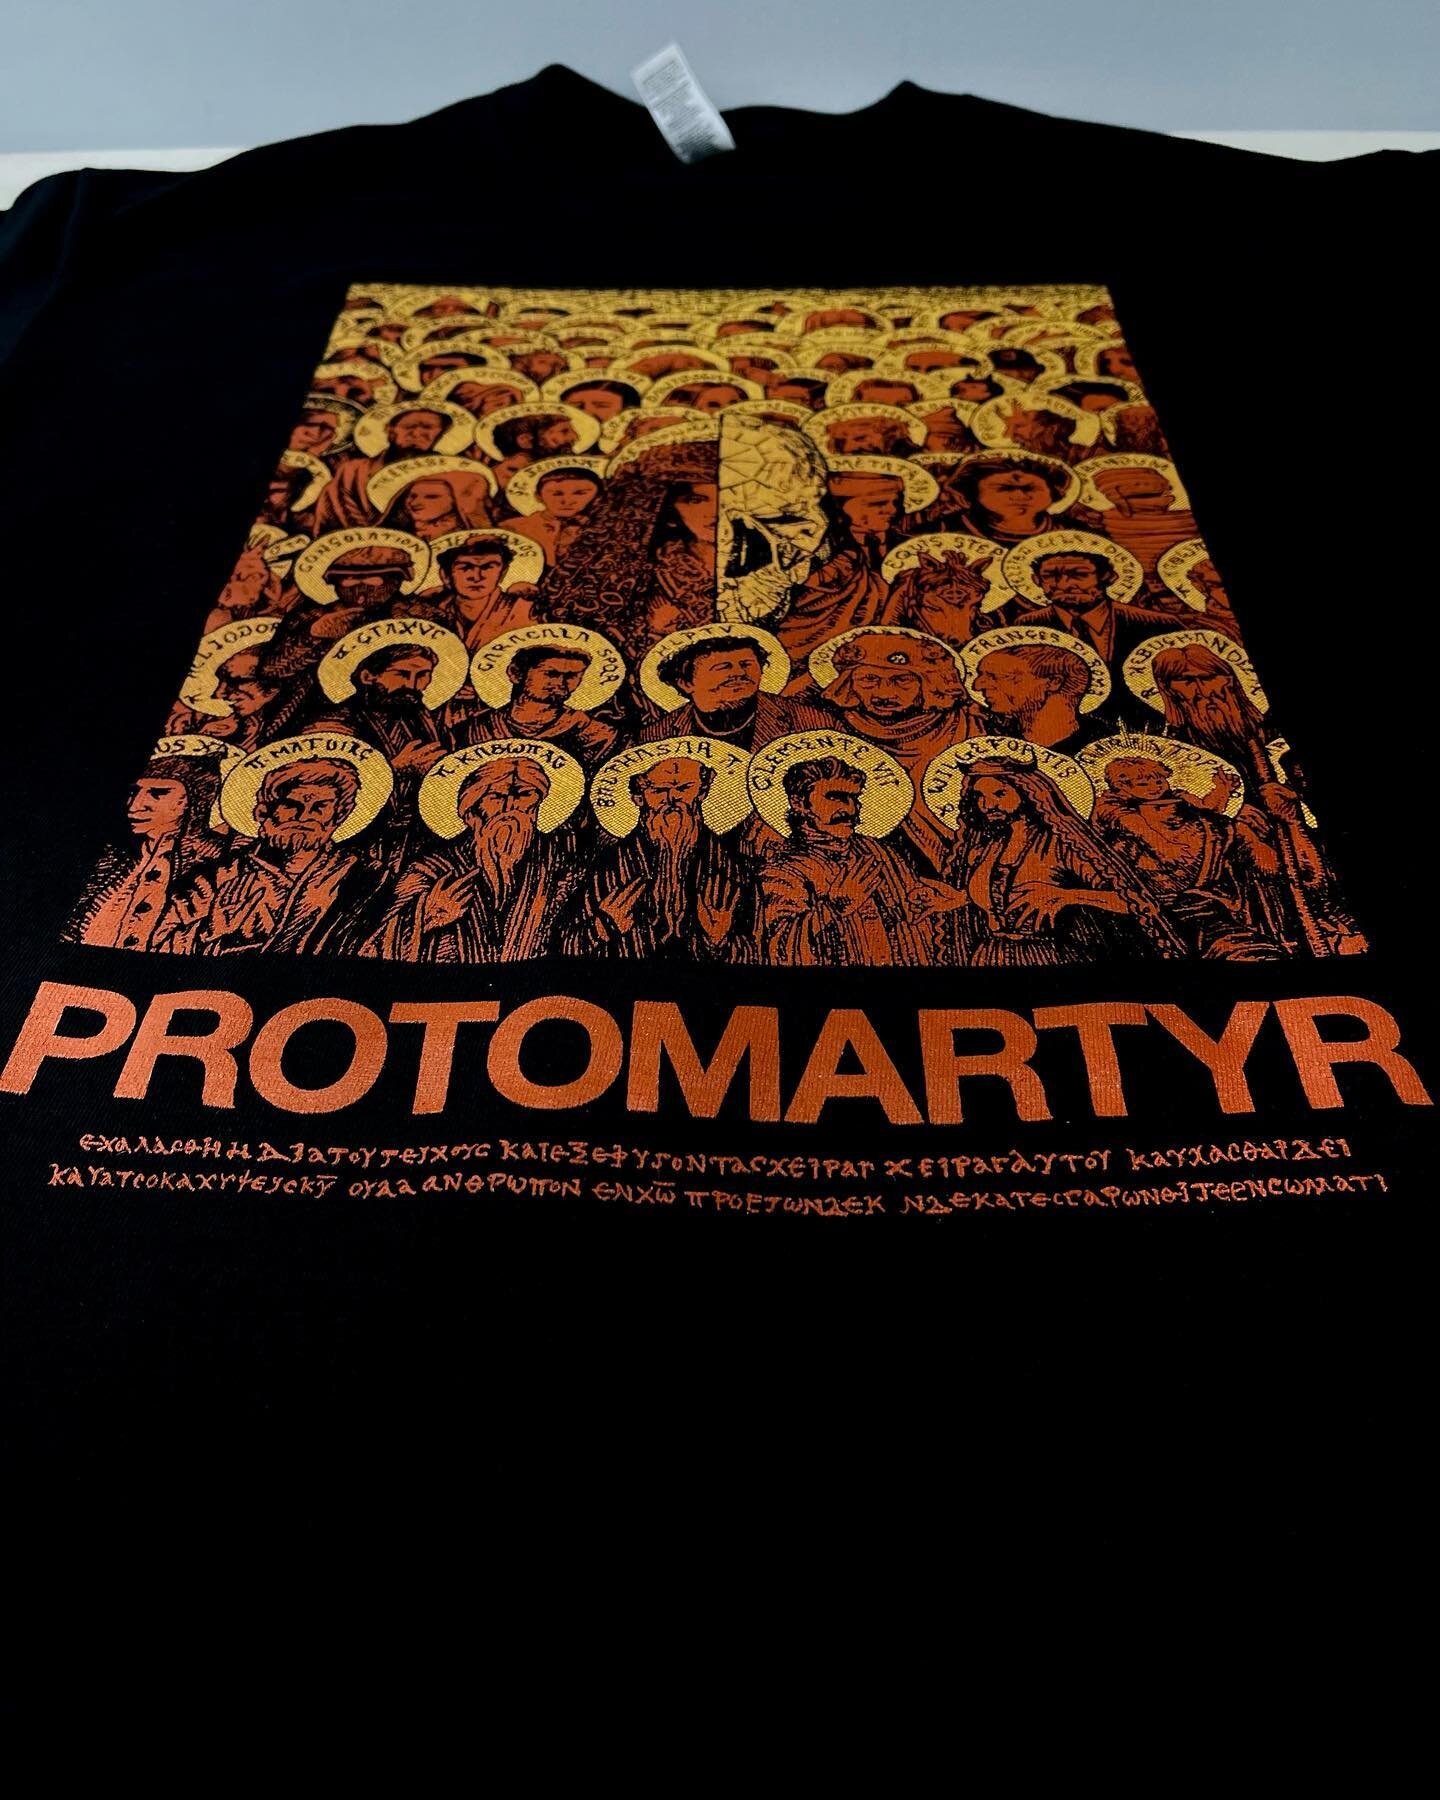 Last minute tour refill for @protomartyrband, in town tomorrow night at @thaliahallchicago ! Highly recommended, if you haven&rsquo;t seen these guys yet get a ticket before it sells out (if it&rsquo;s not already? I have no idea🤷🏻&zwj;♂️)
💥🏠💥

